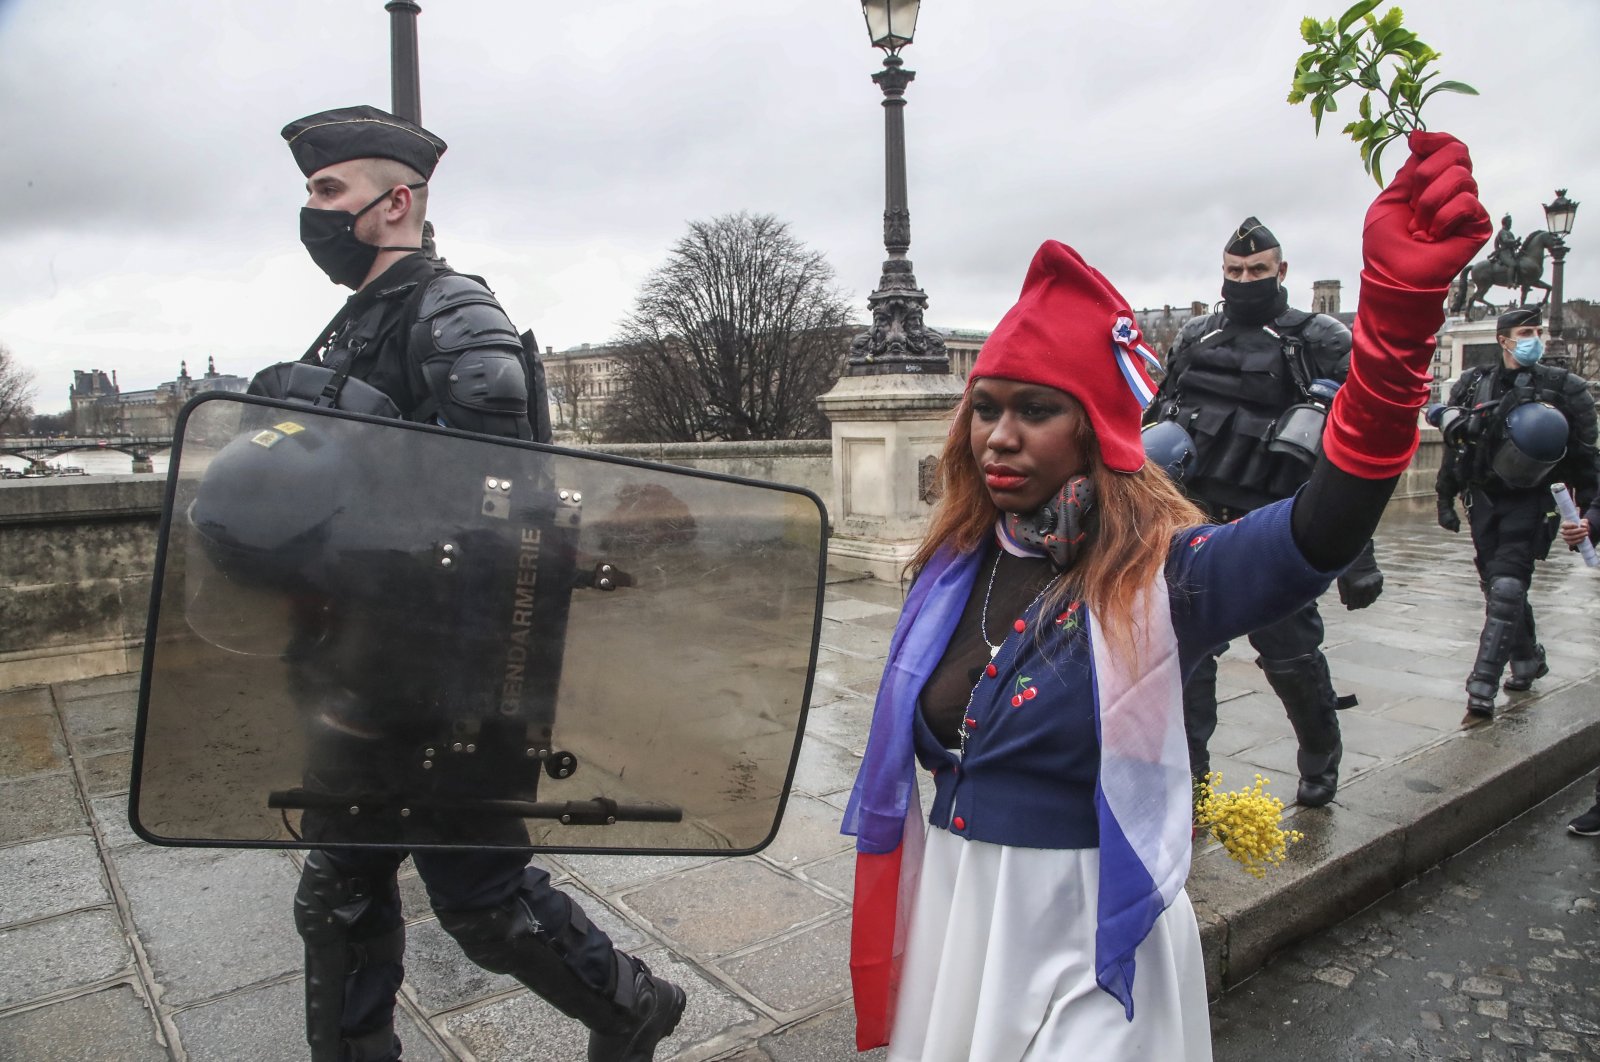 A protester dressed as Marianne, the symbol of the French Republic since the 1789 revolution walks next to riot police officers during a march for freedom in Paris, Saturday, Jan. 23, 2021. (AP Photo)